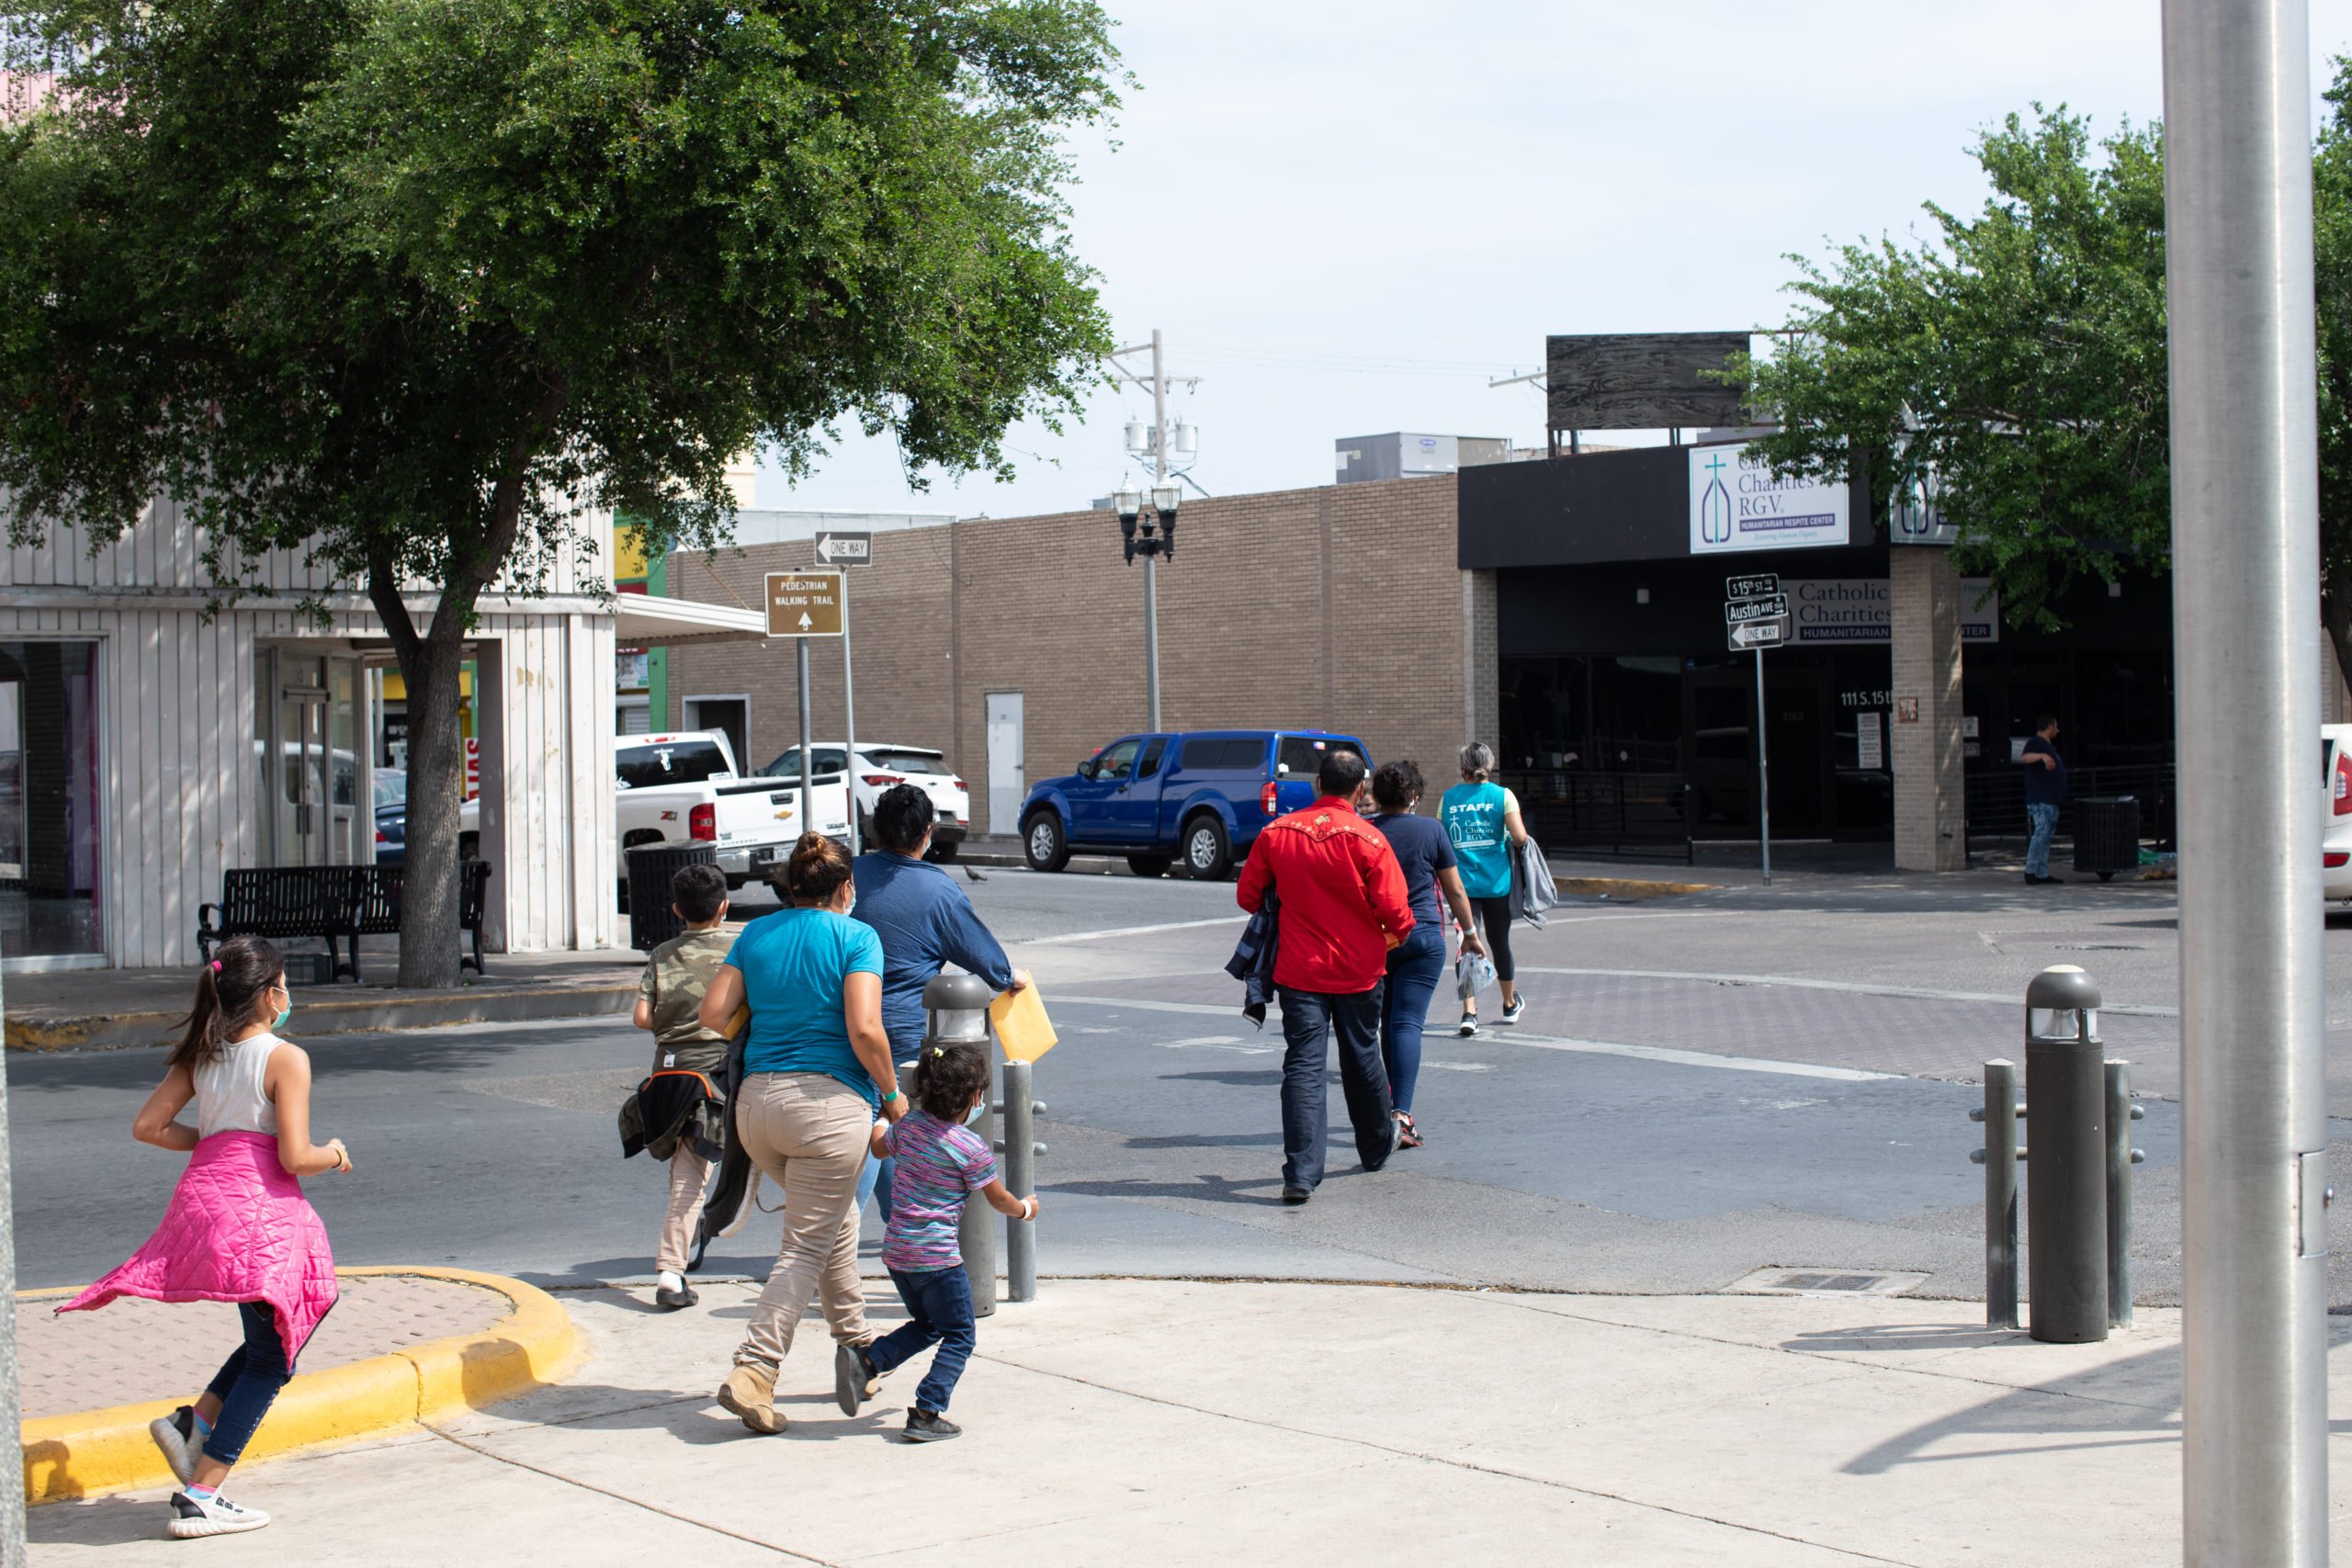 Migrants were escorted from a COVID-19 testing center to a humanitarian respite center operated by the Catholic Charities of the RGV in McAllen, Texas on March 27, 2021. (Kaylee Greenlee - Daily Caller News Foundation) 